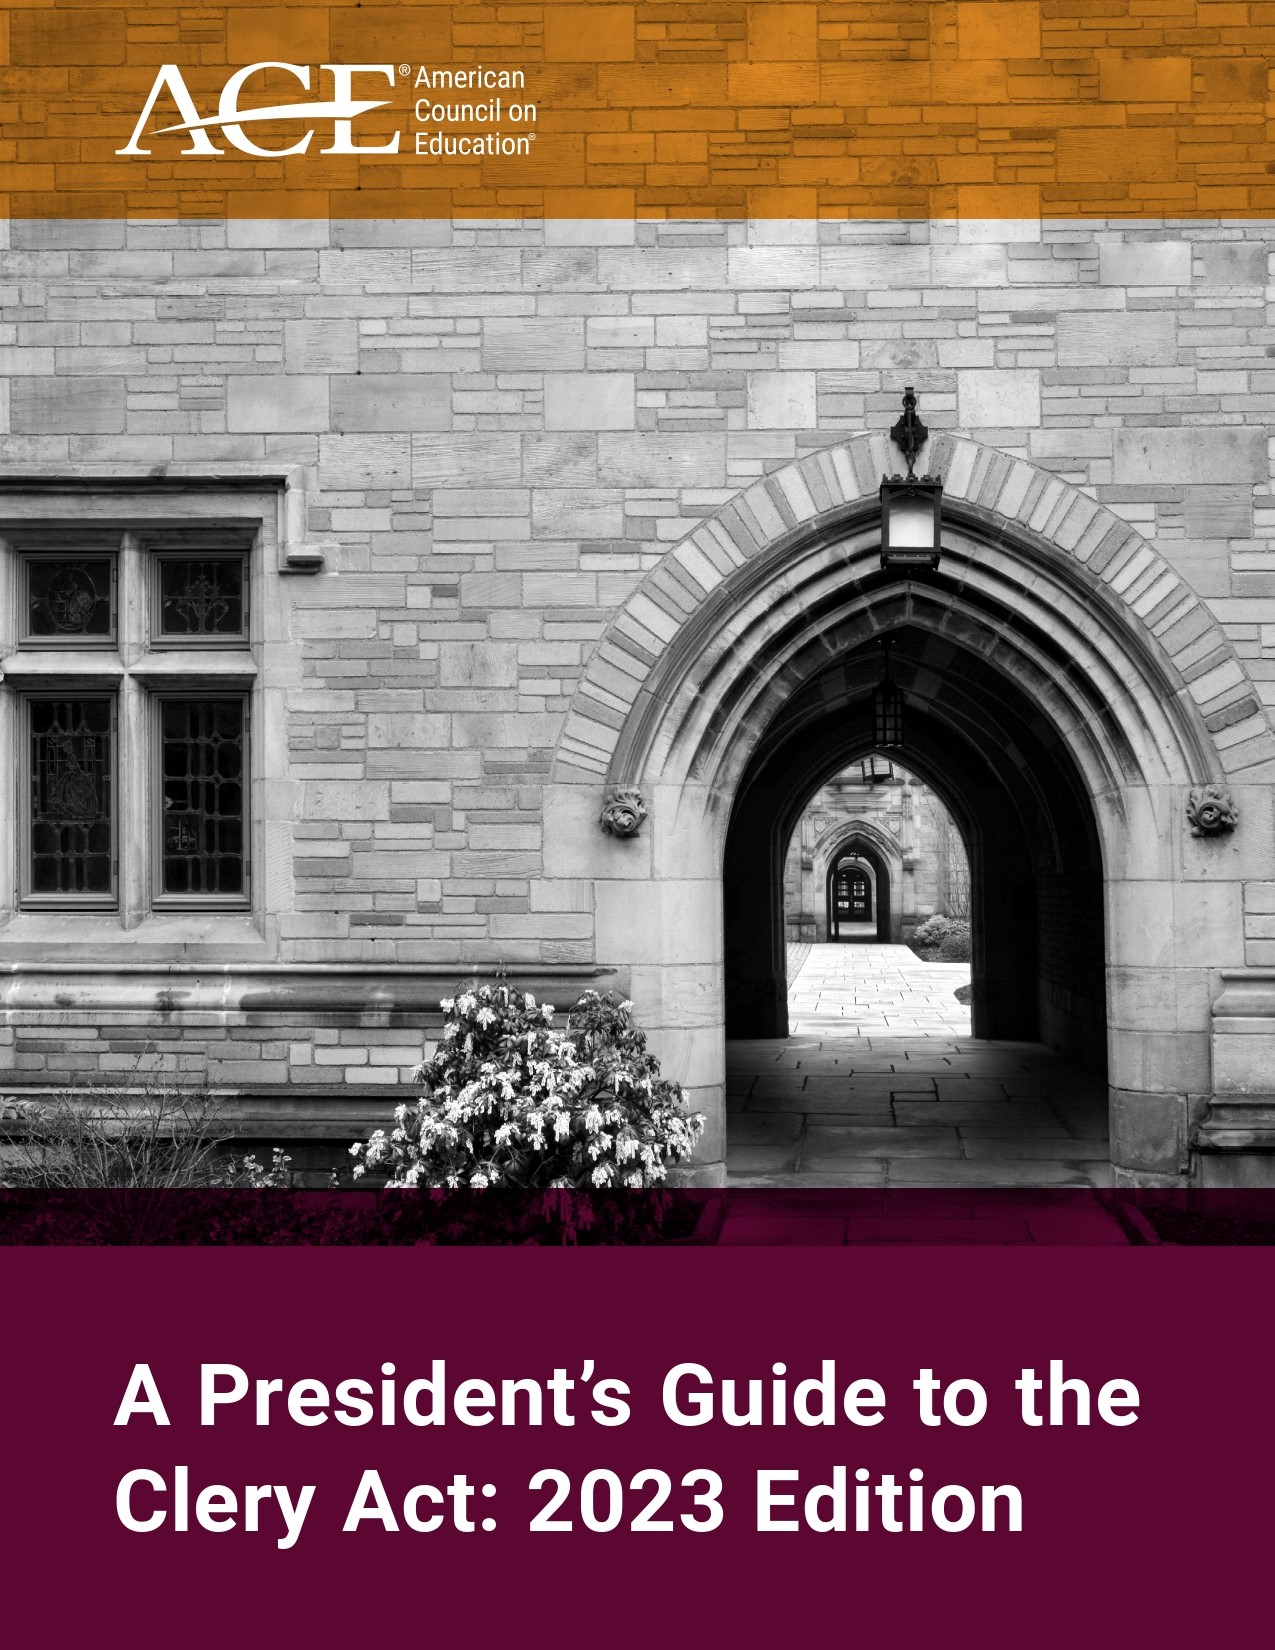 Guide to Clery Act Provides High-Level Overview for Campus Leaders